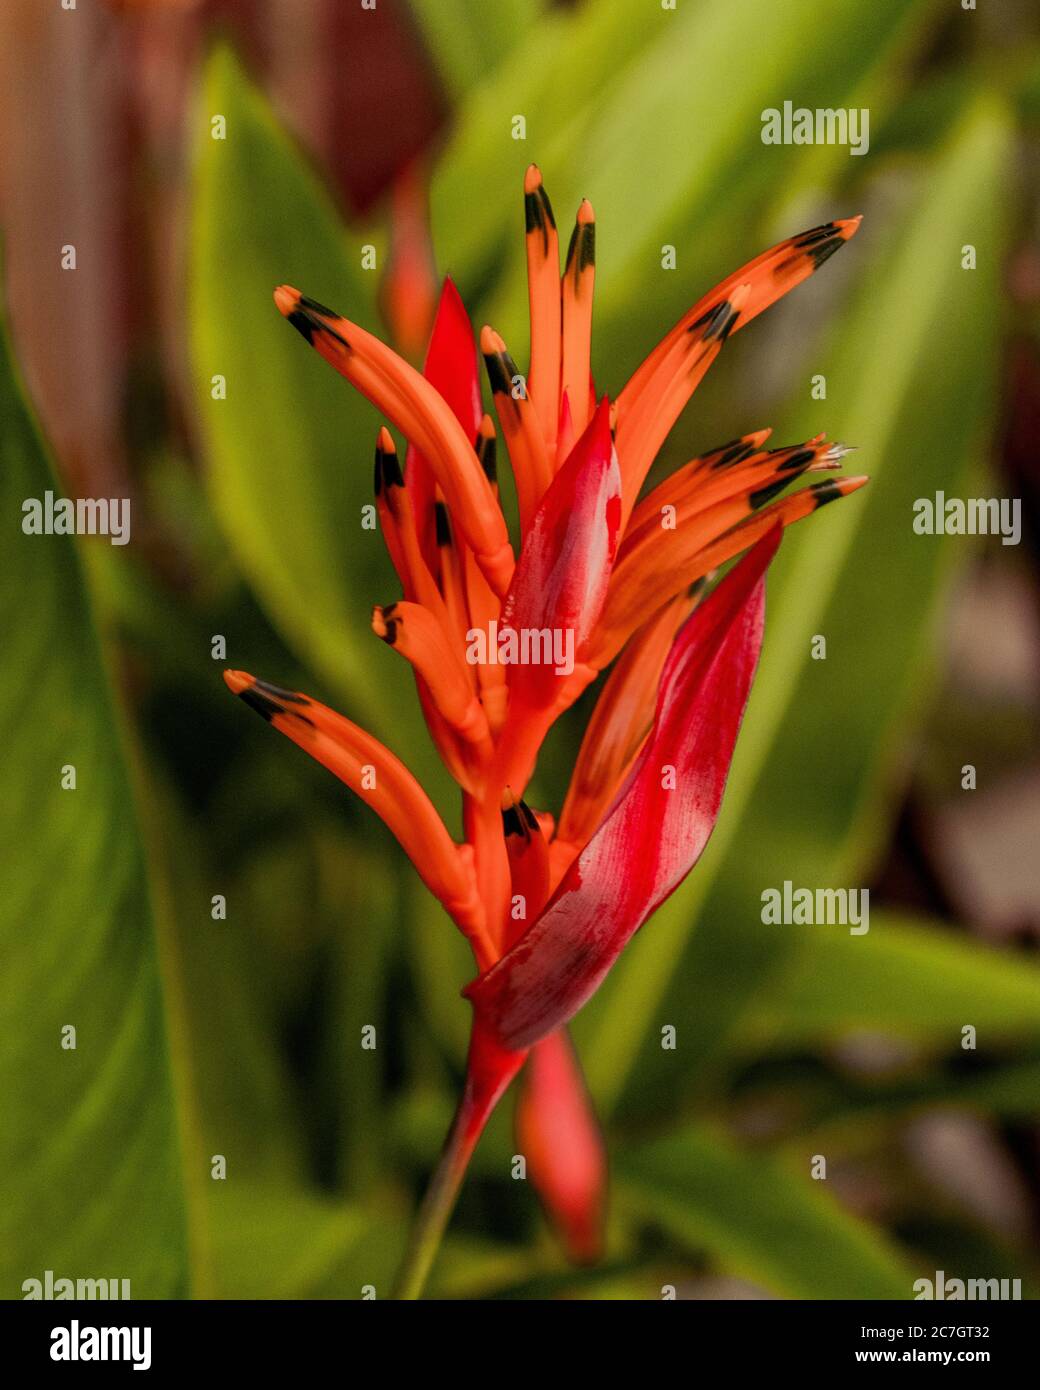 Orange, red and black parrot flower, bright contrast on green leafy background, Heliconia Psittacorum Stock Photo